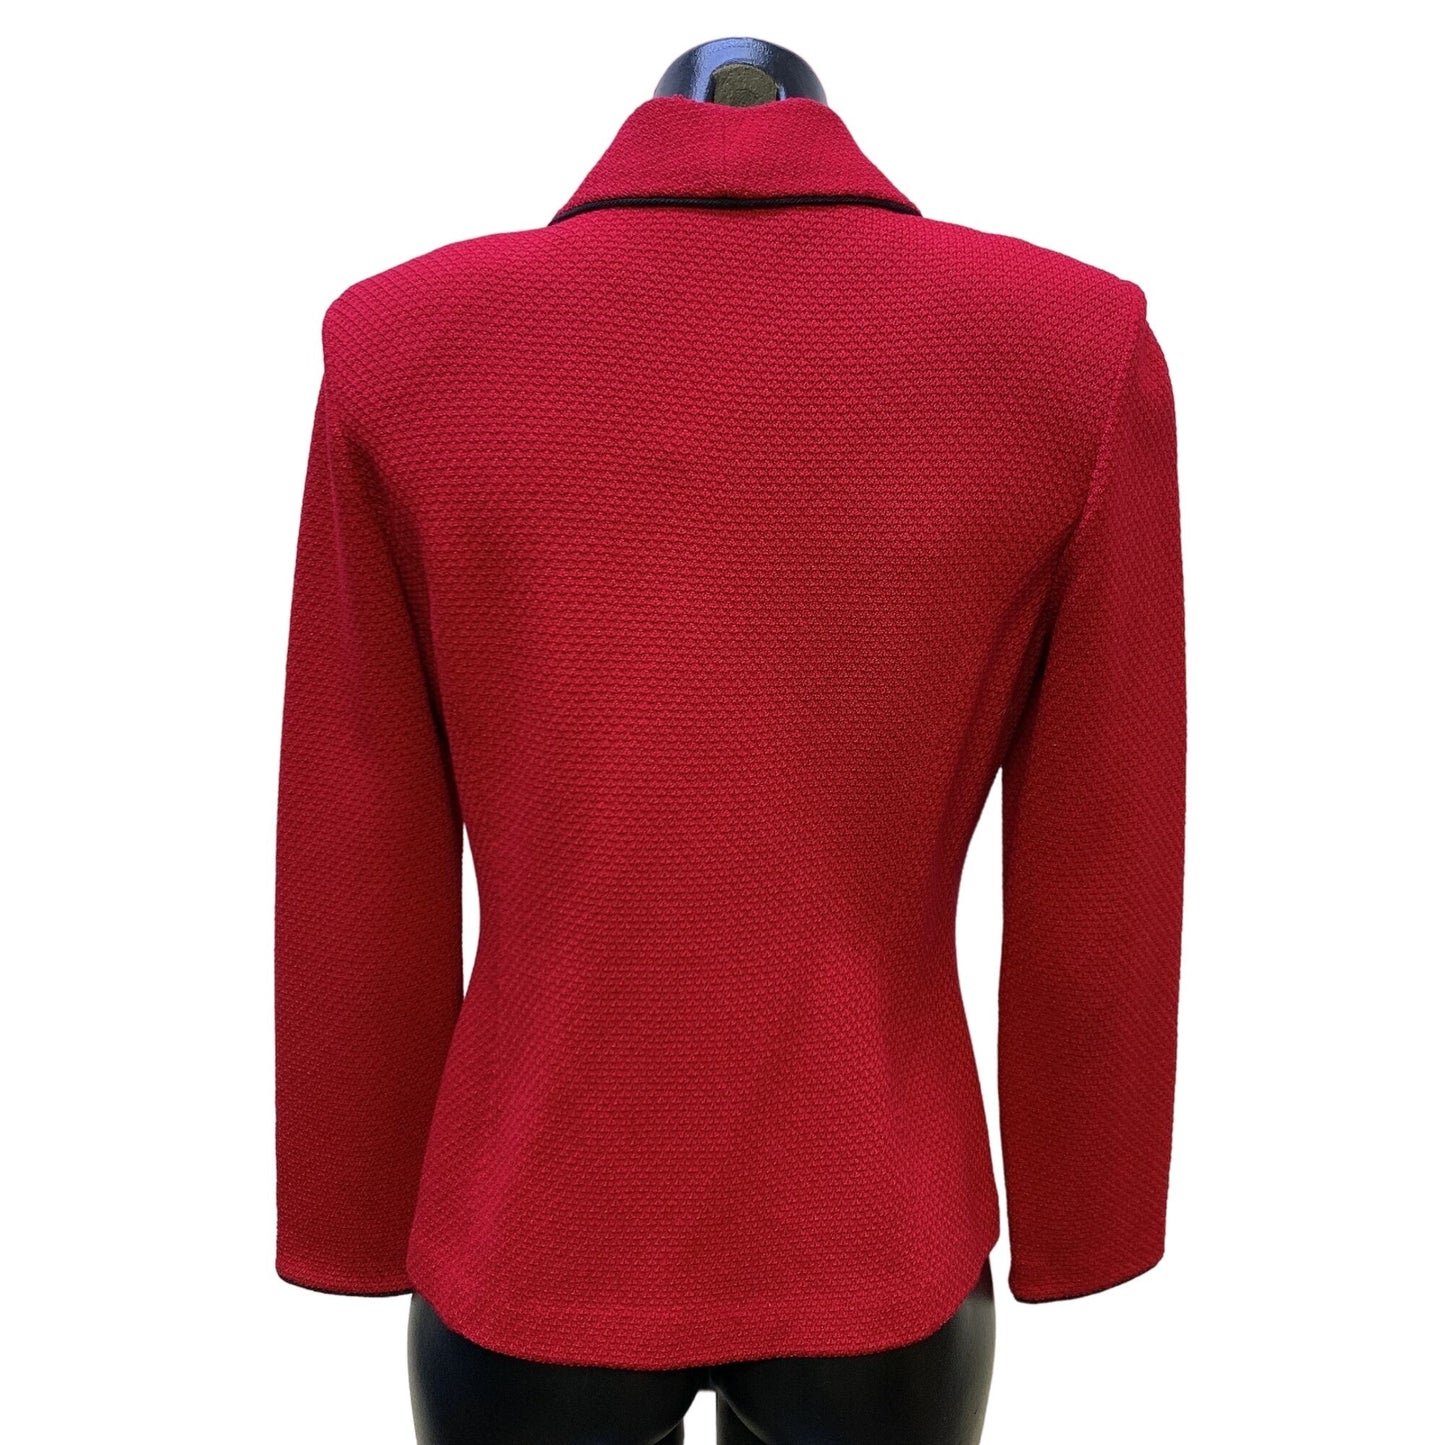 *St. John Collection by Marie Gray Red Knit Blazer/Jacket Size 4